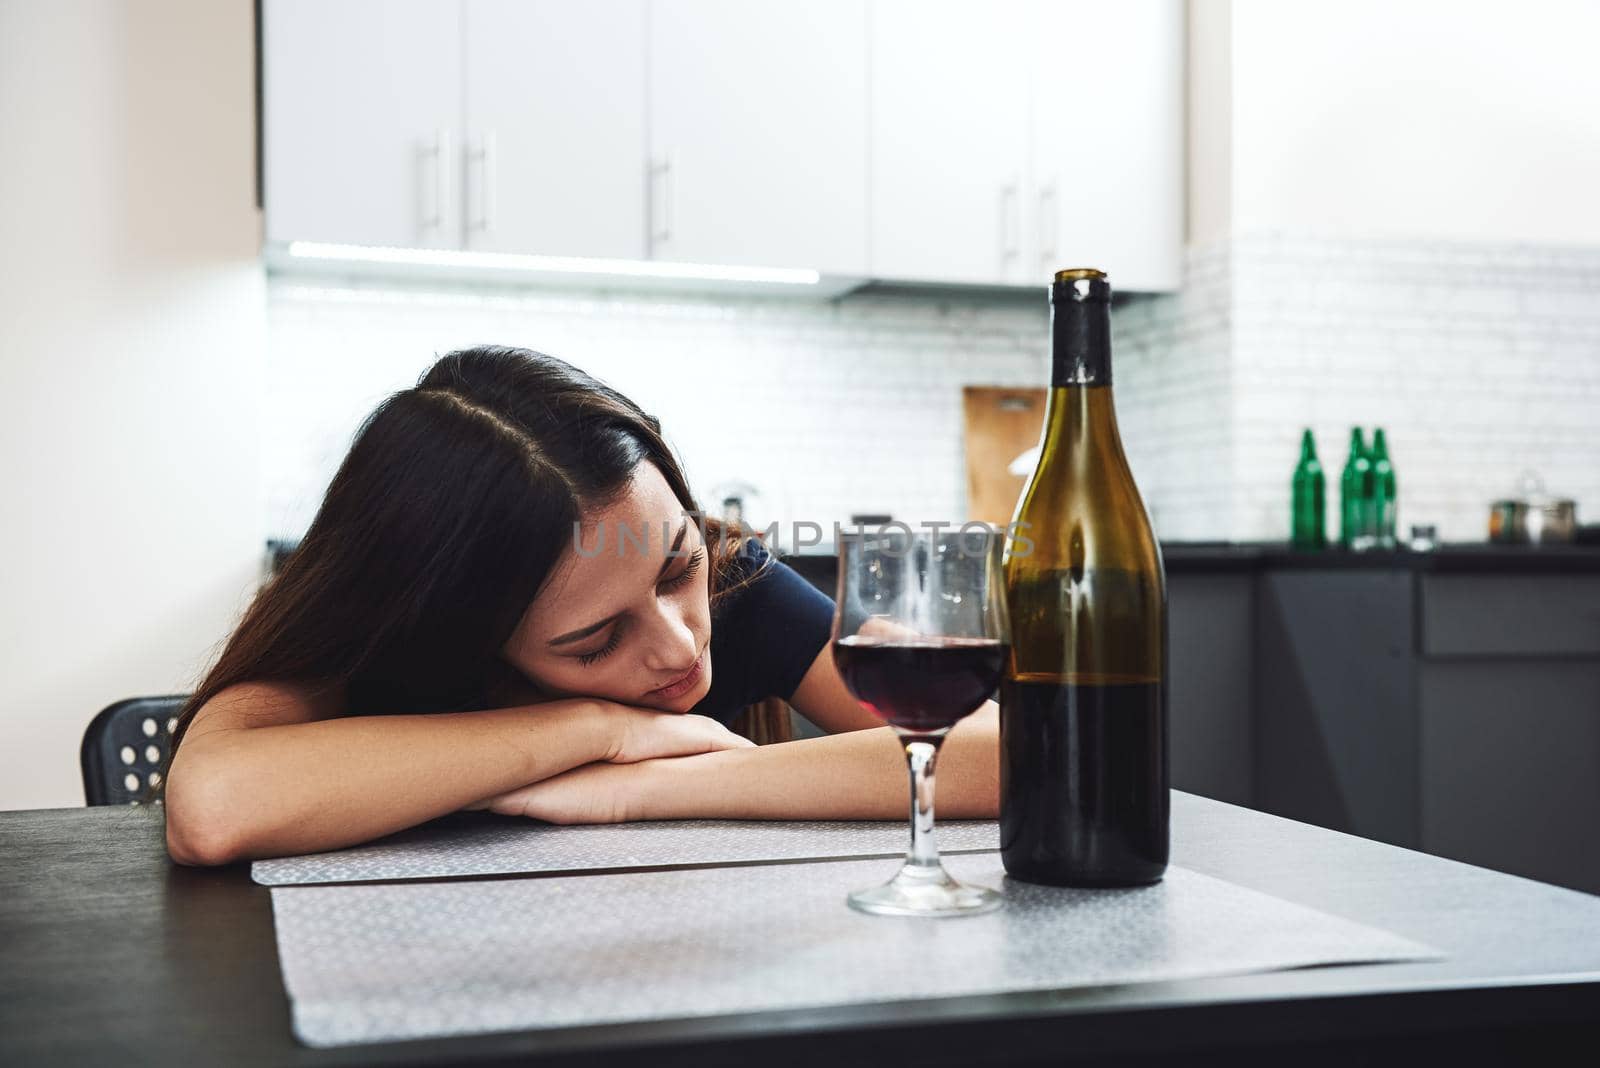 What is addiction, really It is a sign, a signal, a symptom of distress. Young addicted, depressed woman sleeping in the kitchen by friendsstock